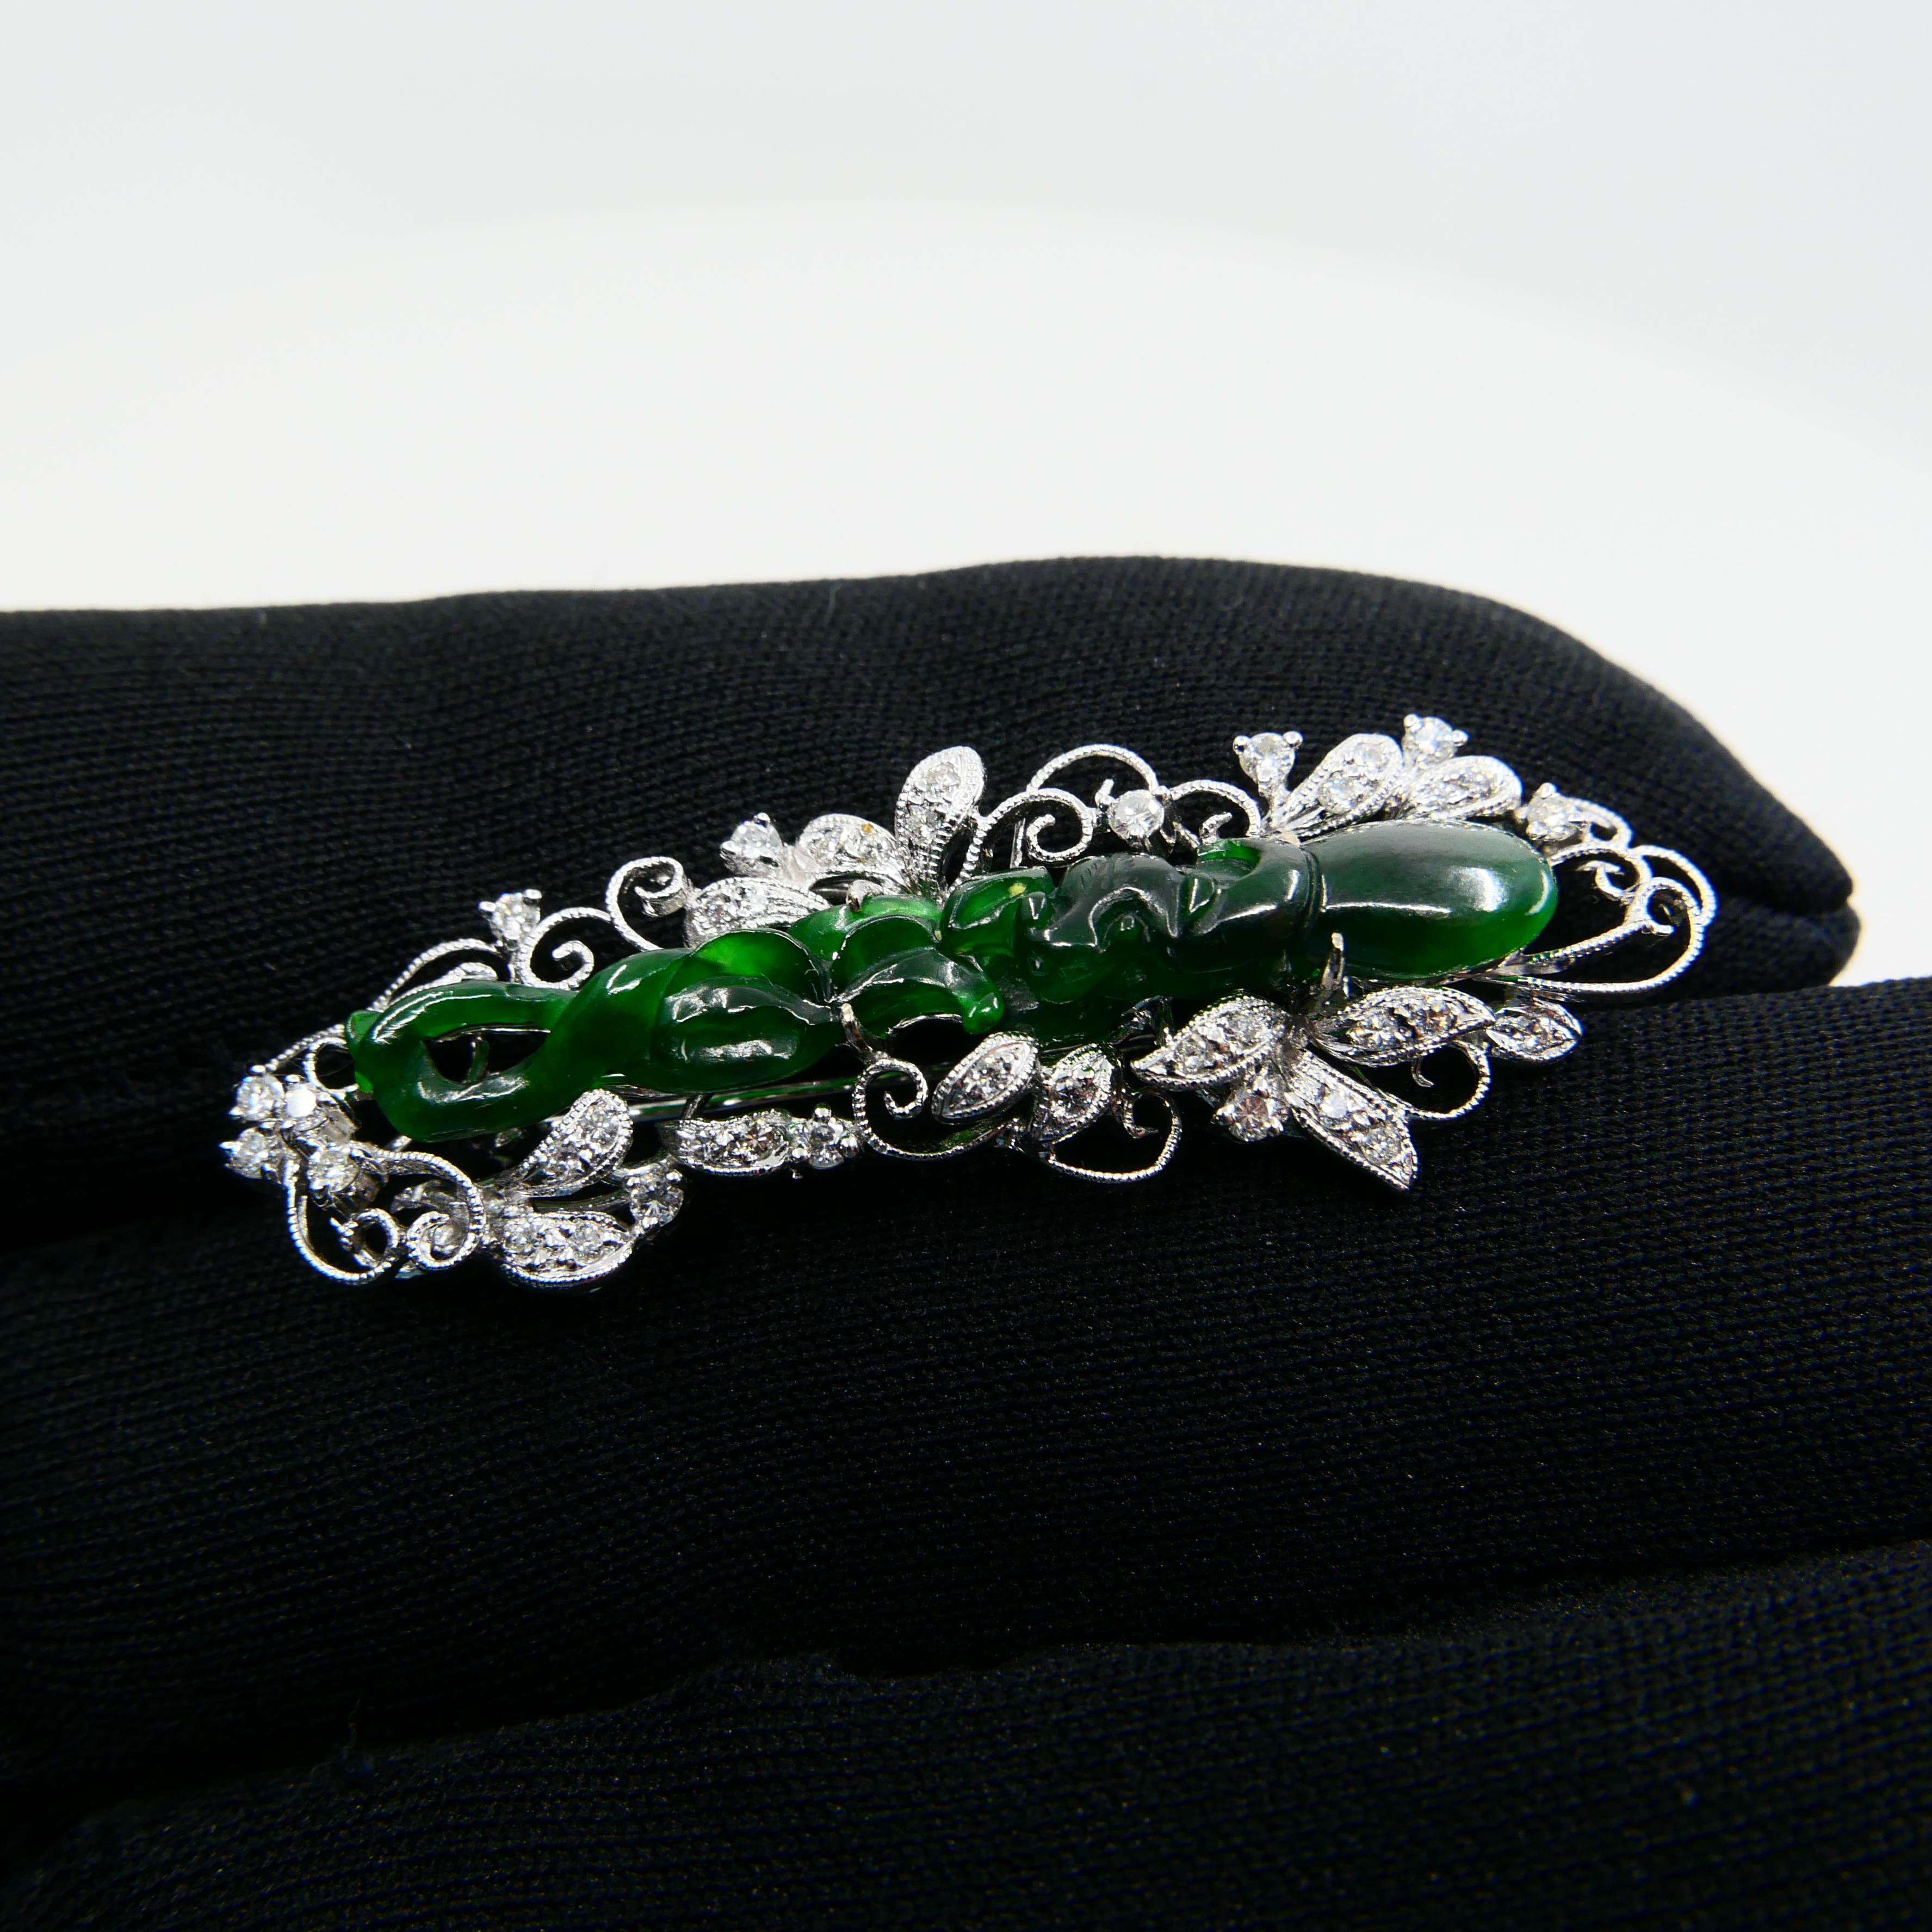 Certified Intense Green Carved Jade & Diamond Brooch, Close to Imperial Green For Sale 7